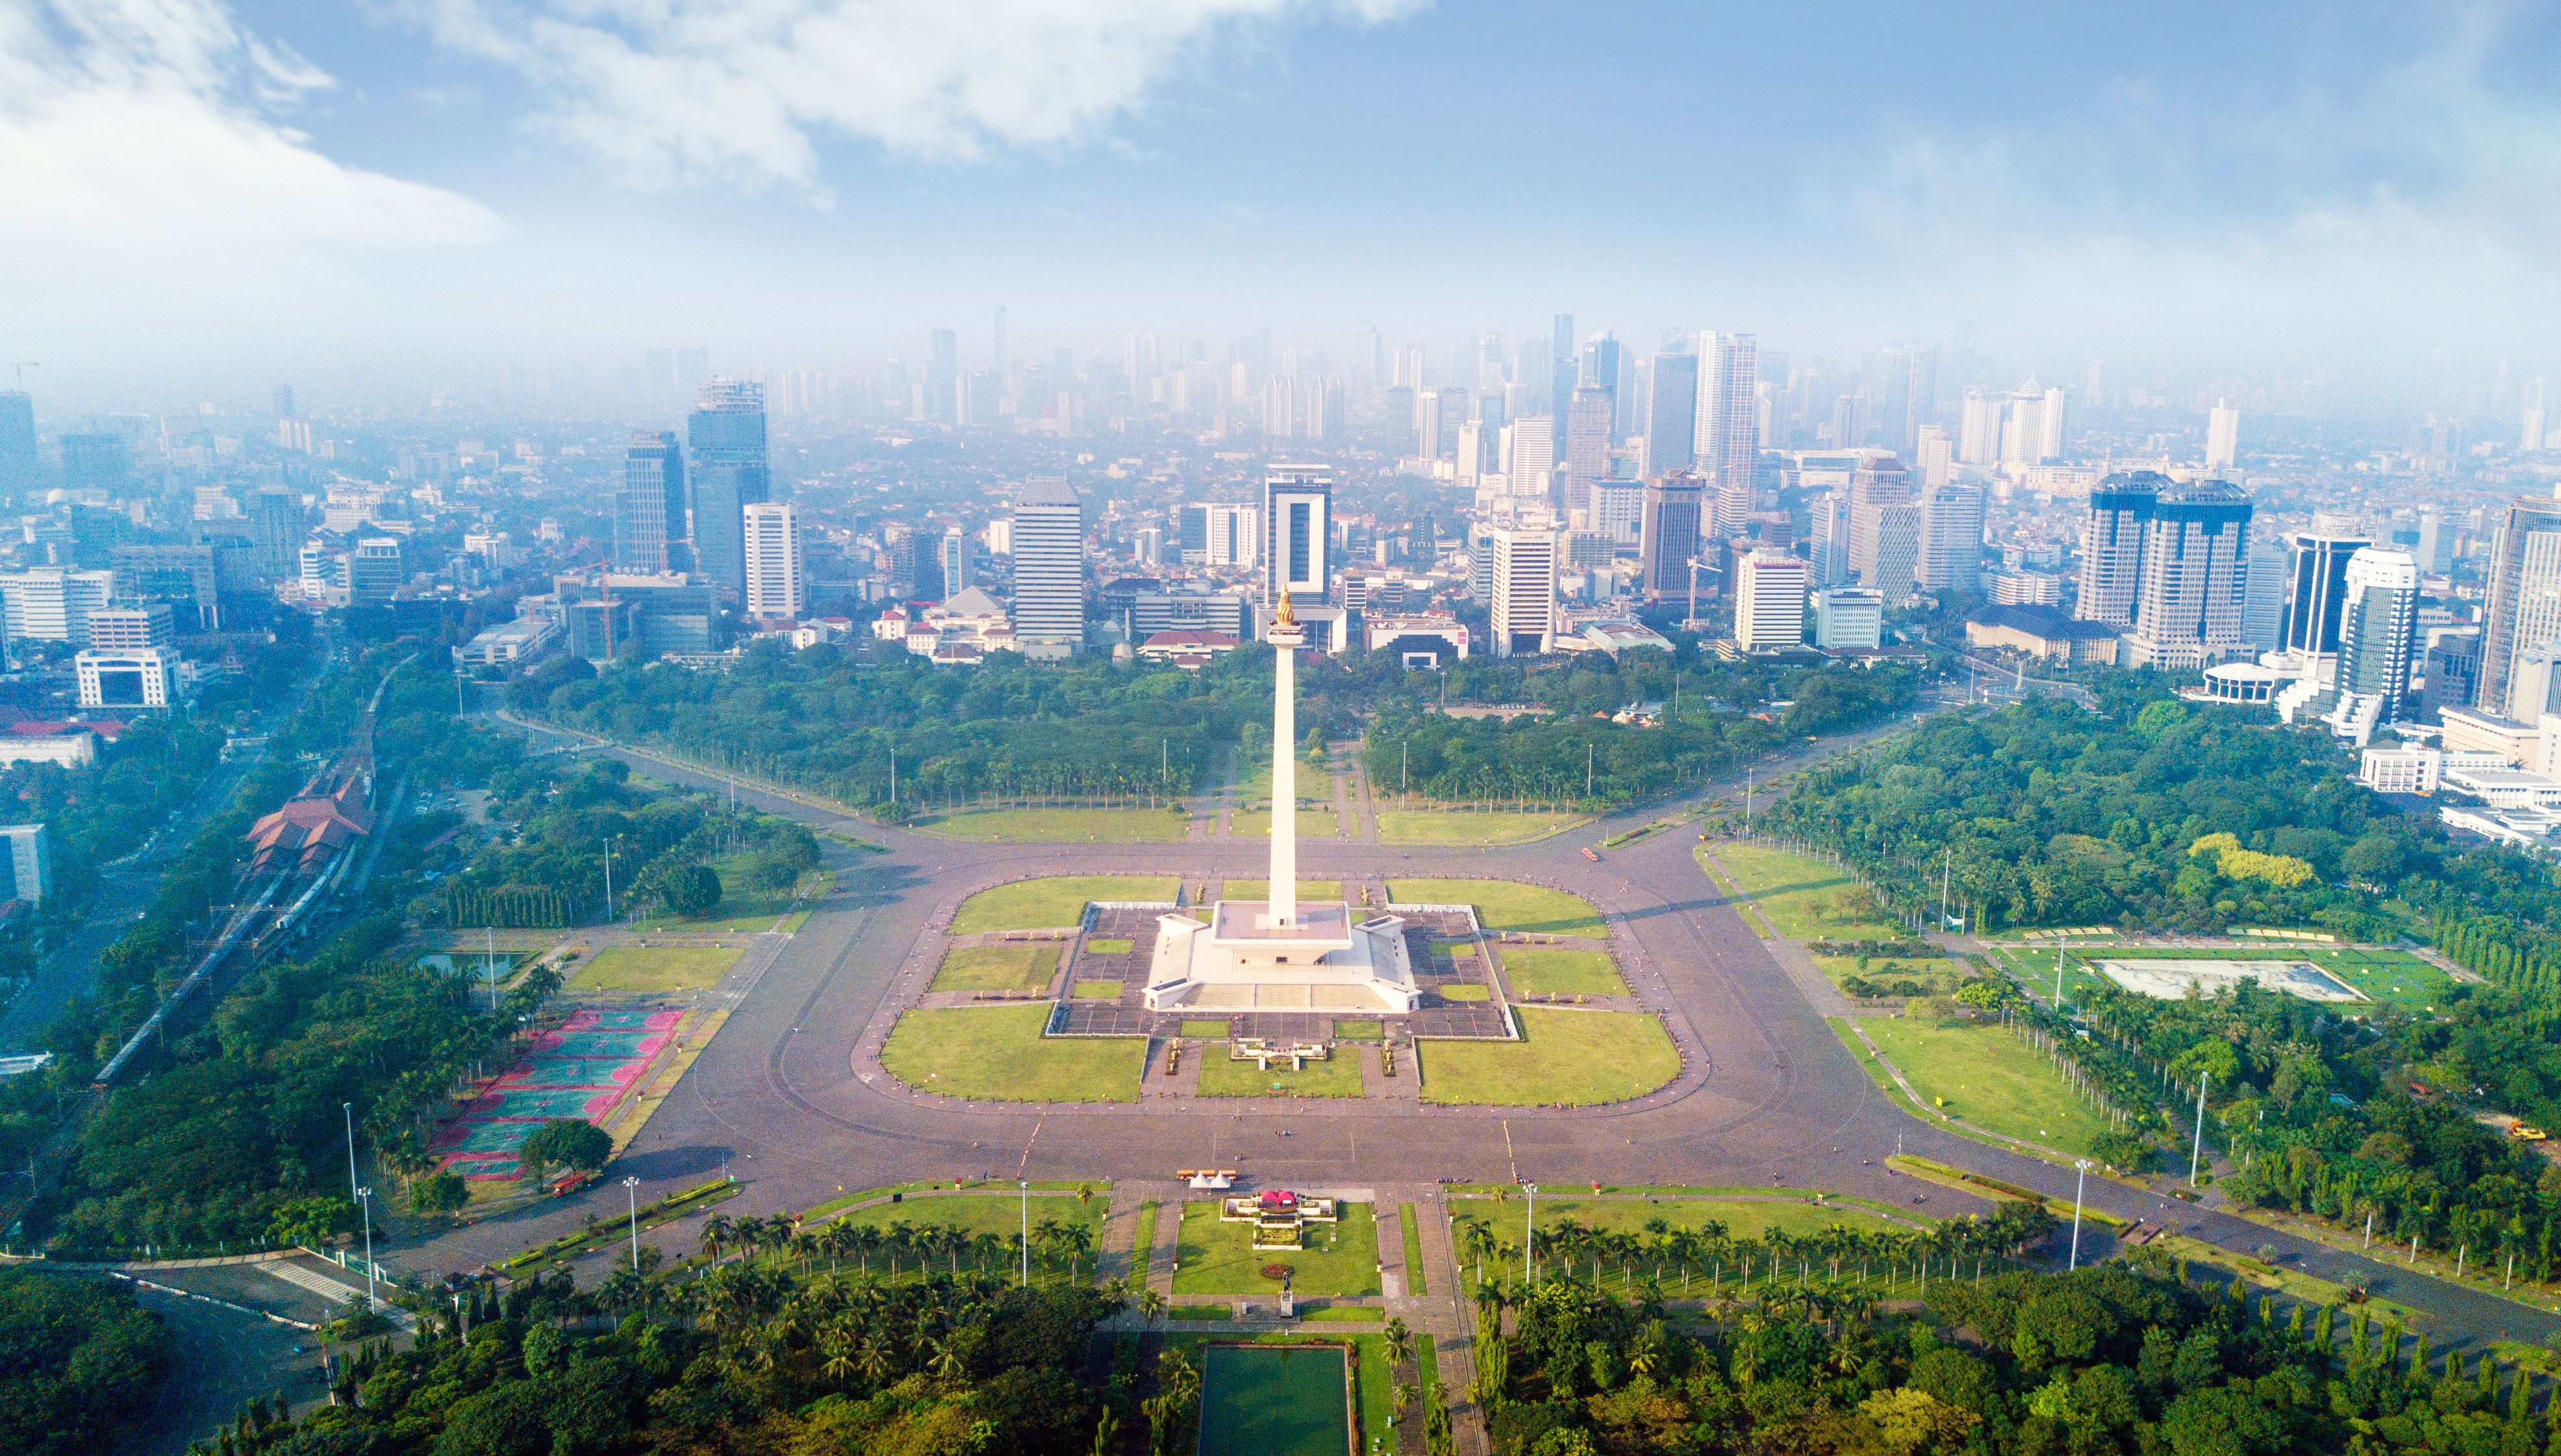 Jakarta is an upbeat city that moves at a fast pace, whether that means the  traffic on the streets or the redevelopment projects that continue to pop  up all